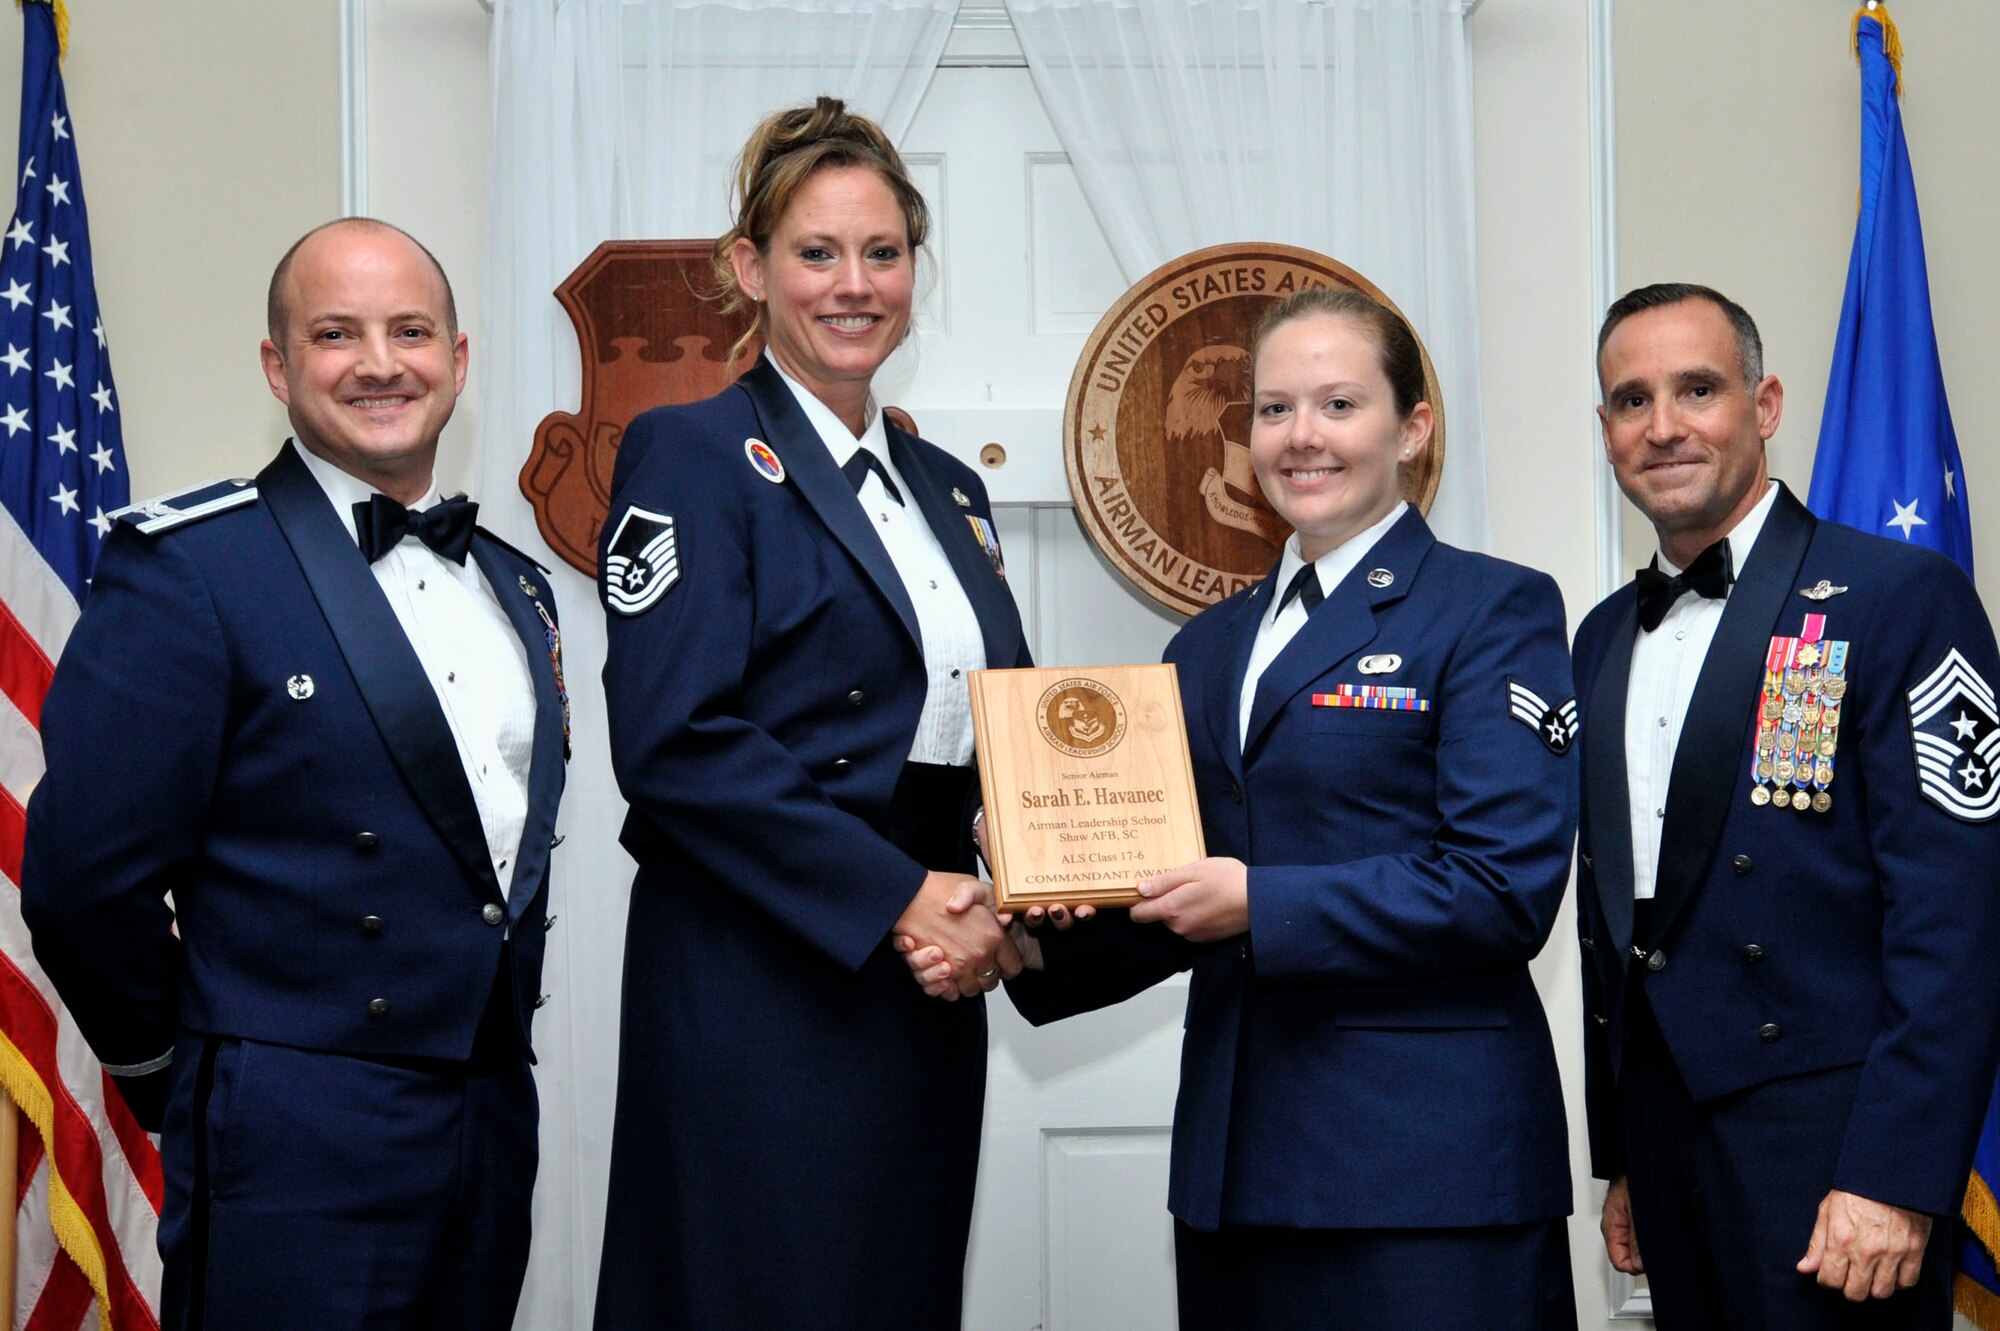 The Commandant award is given to the student who most exemplifies professional military qualities and is chosen by their peers, their primary instructors, and the ALS commandant.